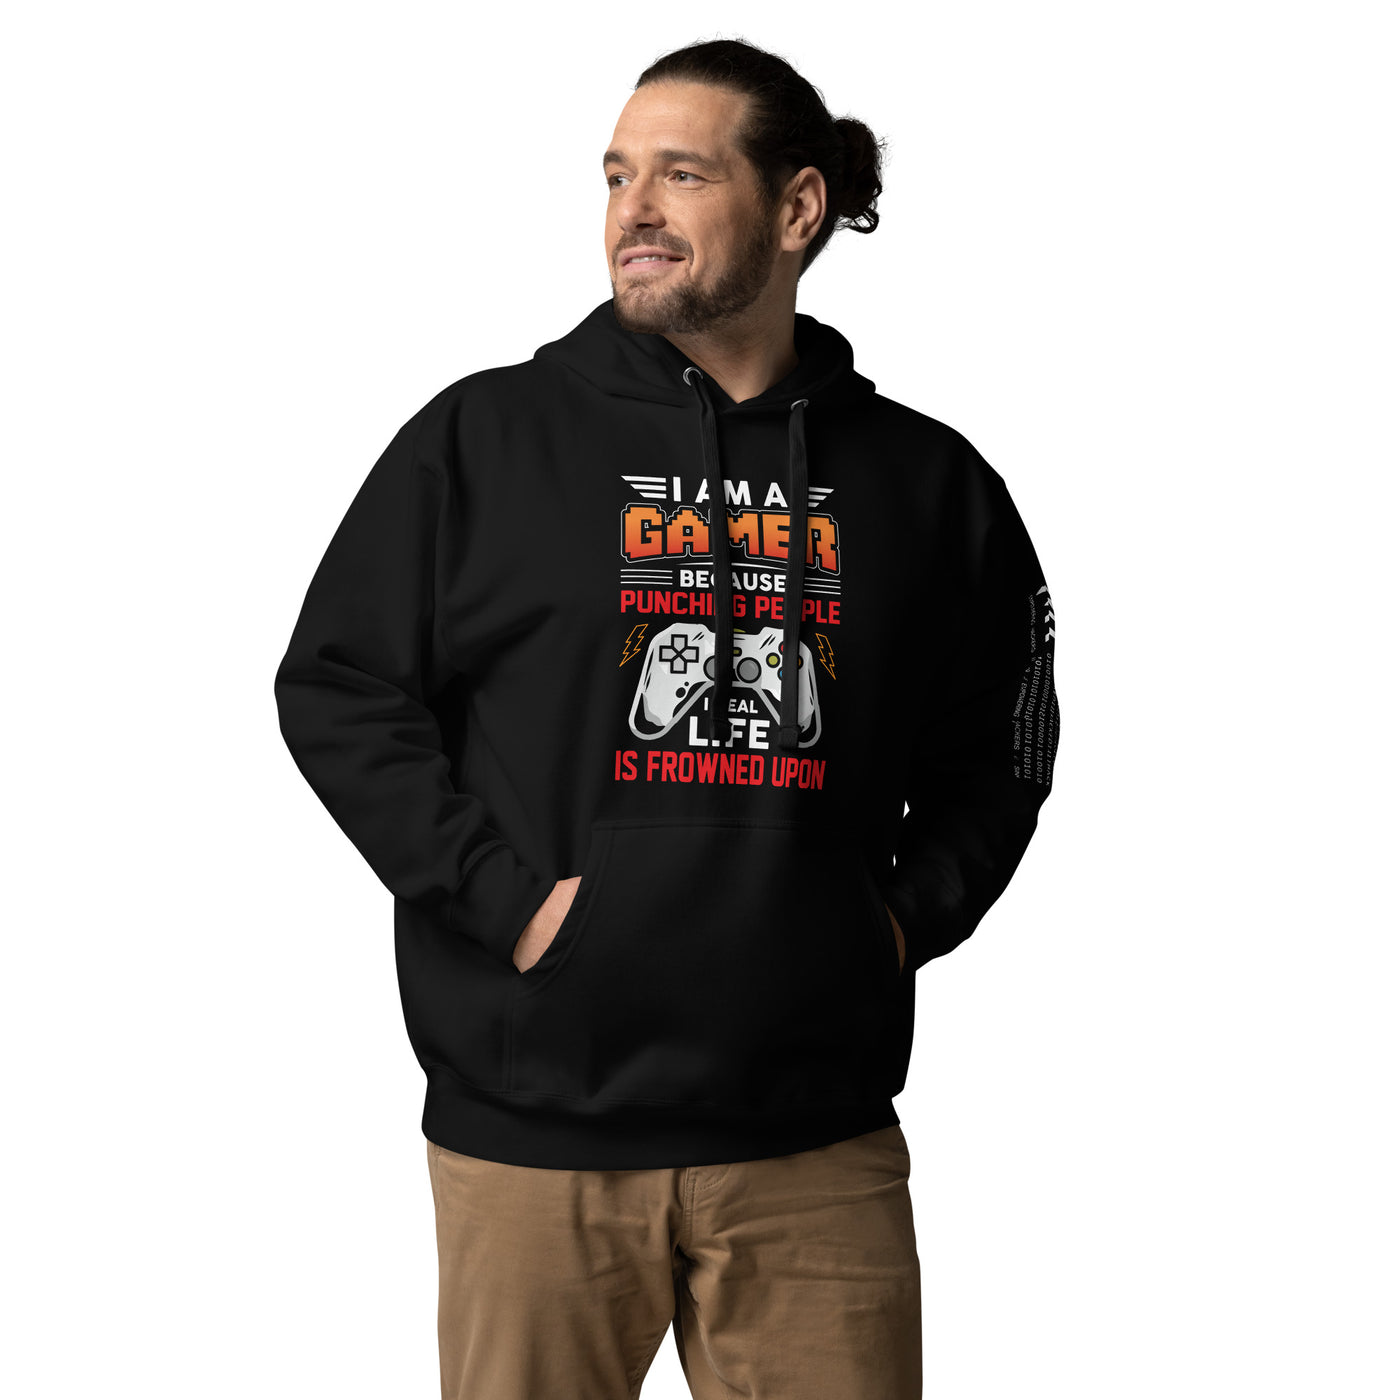 I am a Gamer because Punching people in real life is frowned upon - Unisex Hoodie